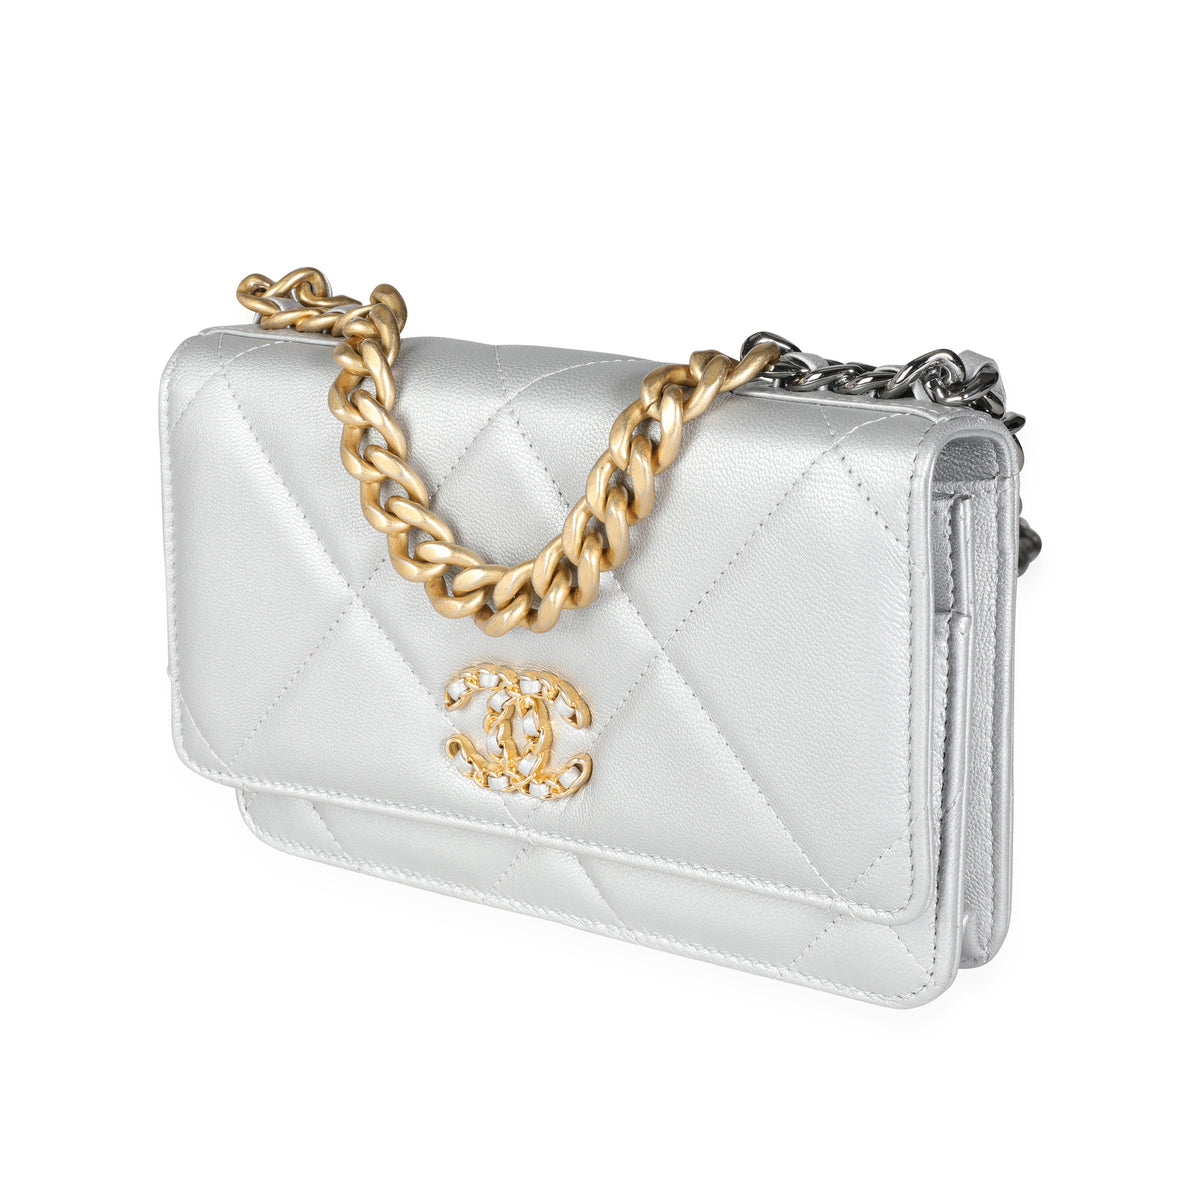 Chanel 19 Wallet On Chain Metallic in Lambskin Leather with Gold